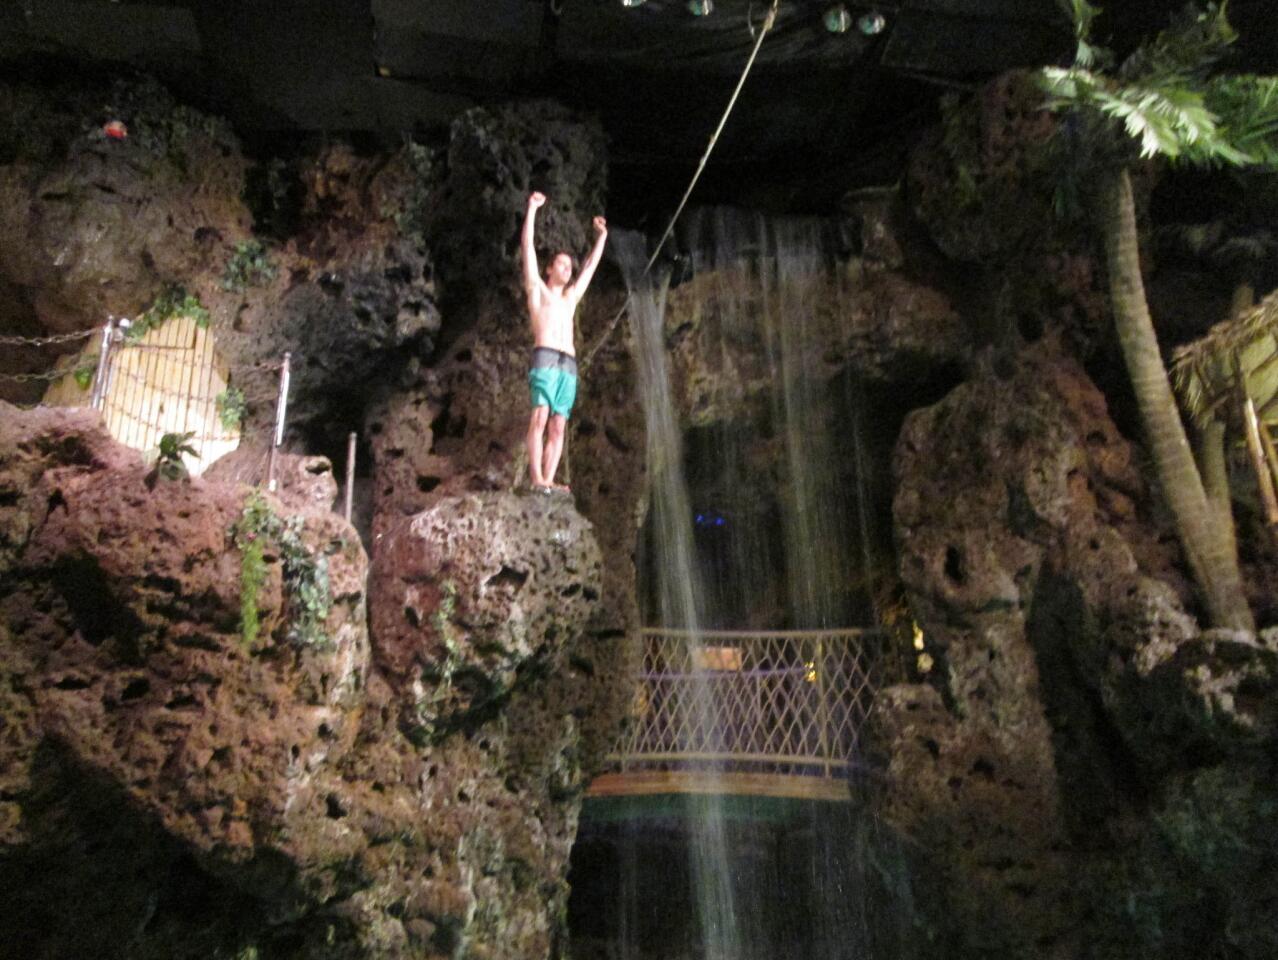 Cliff diver Travis Sims prepares to leap at Casa Bonita. He calls the restaurant "Chuck E. Cheese meets Disneyland." Now in its 40th year, the eccentric Colorado eatery attracts people from around the world.